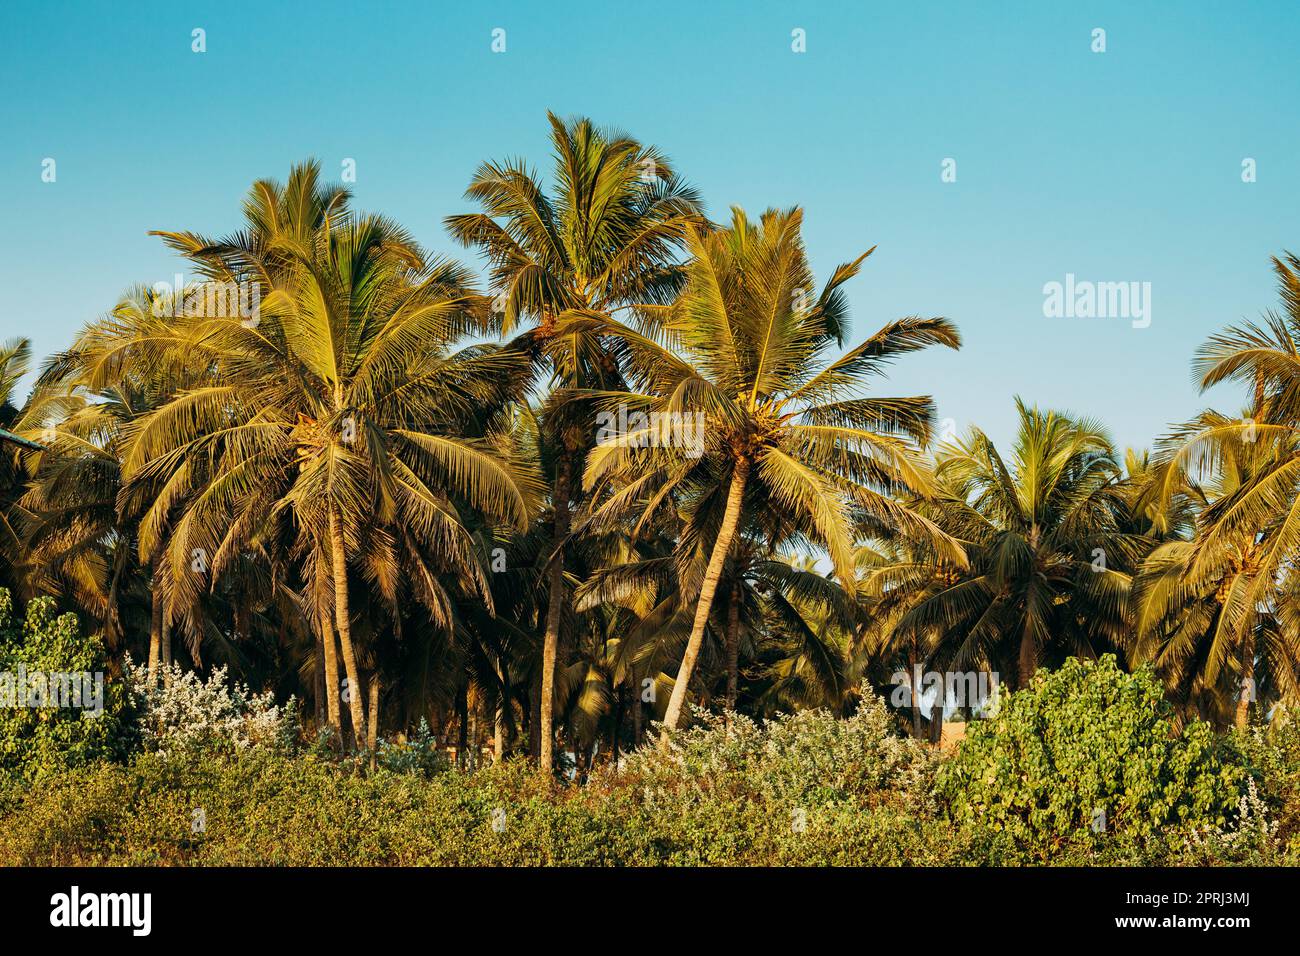 Goa, India. Coconut Trees Palms Among Other Greenery In Sunny Day Stock Photo